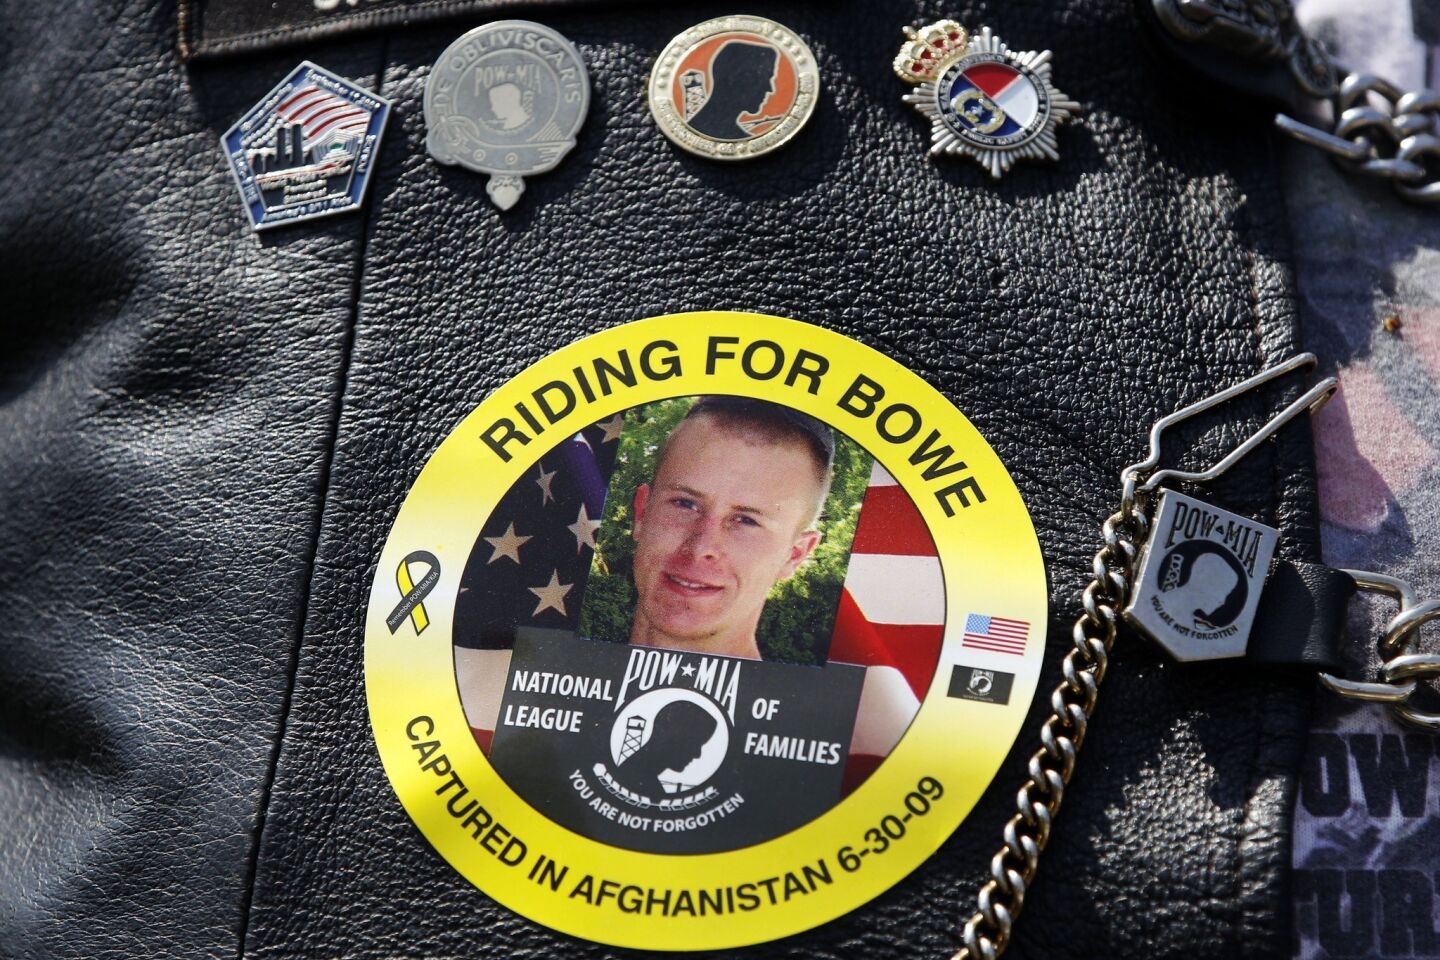 An image of Bowe Bergdahl is worn by an attendee at the annual Rolling Thunder rally for POW/MIA awareness in Washington.